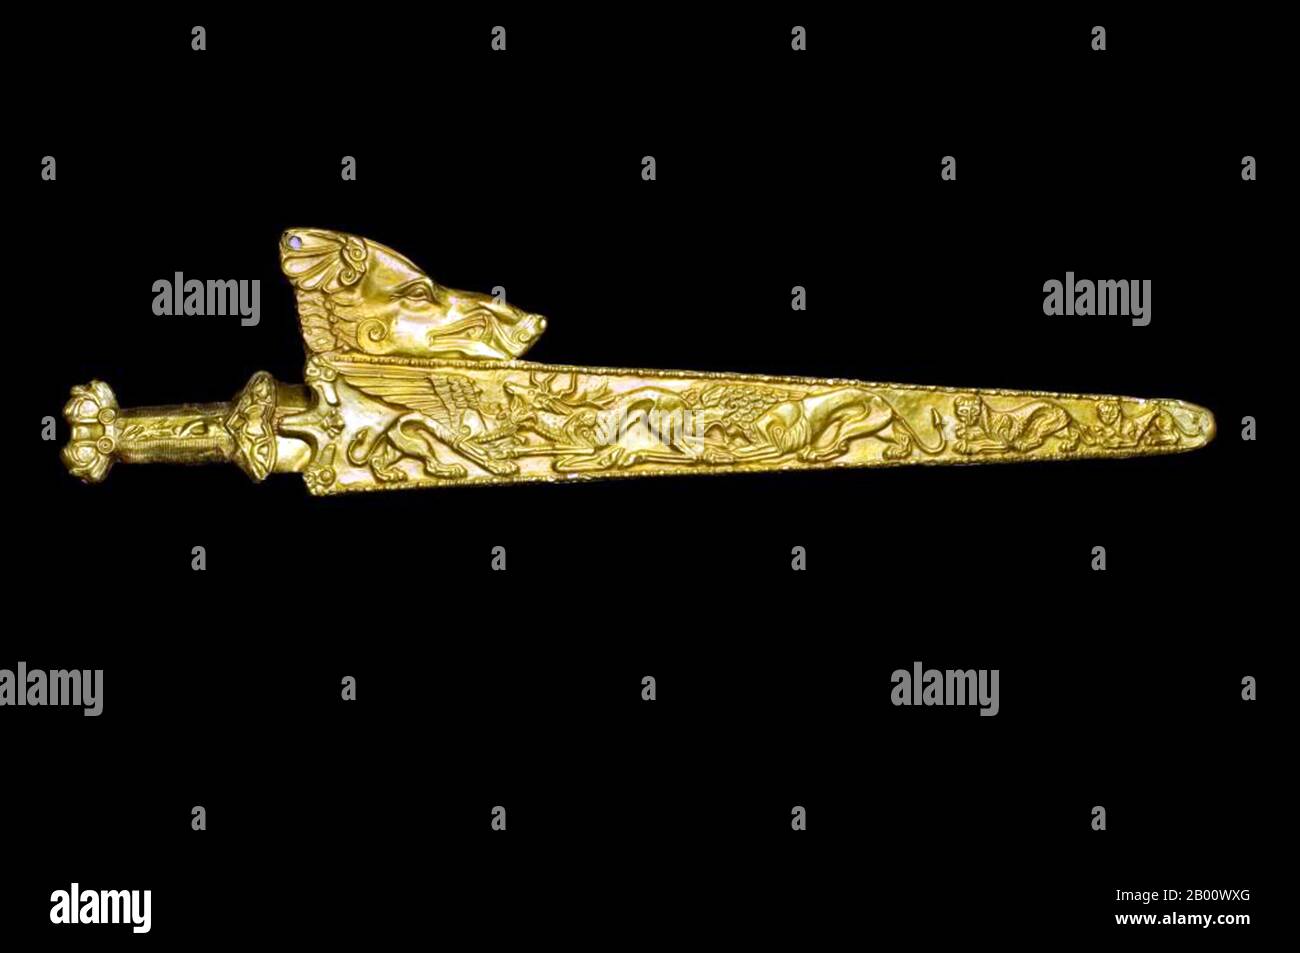 Ukraine: Scythian gold sword and scabbard.   The scabbard has a representation of the intertwined beasts and gryphons of the Inner Earth. From Bolschaja Beloserka. Museum of Historic Treasures of Ukraine, Kiev. Image released to the press in 2009.  The Scythians were an ancient Iranian people of horse-riding nomadic pastoralists who throughout Classical Antiquity dominated the Pontic-Caspian steppe, known at the time as Scythia. By Late Antiquity the closely-related Sarmatians came to dominate the Scythians in the west. Stock Photo